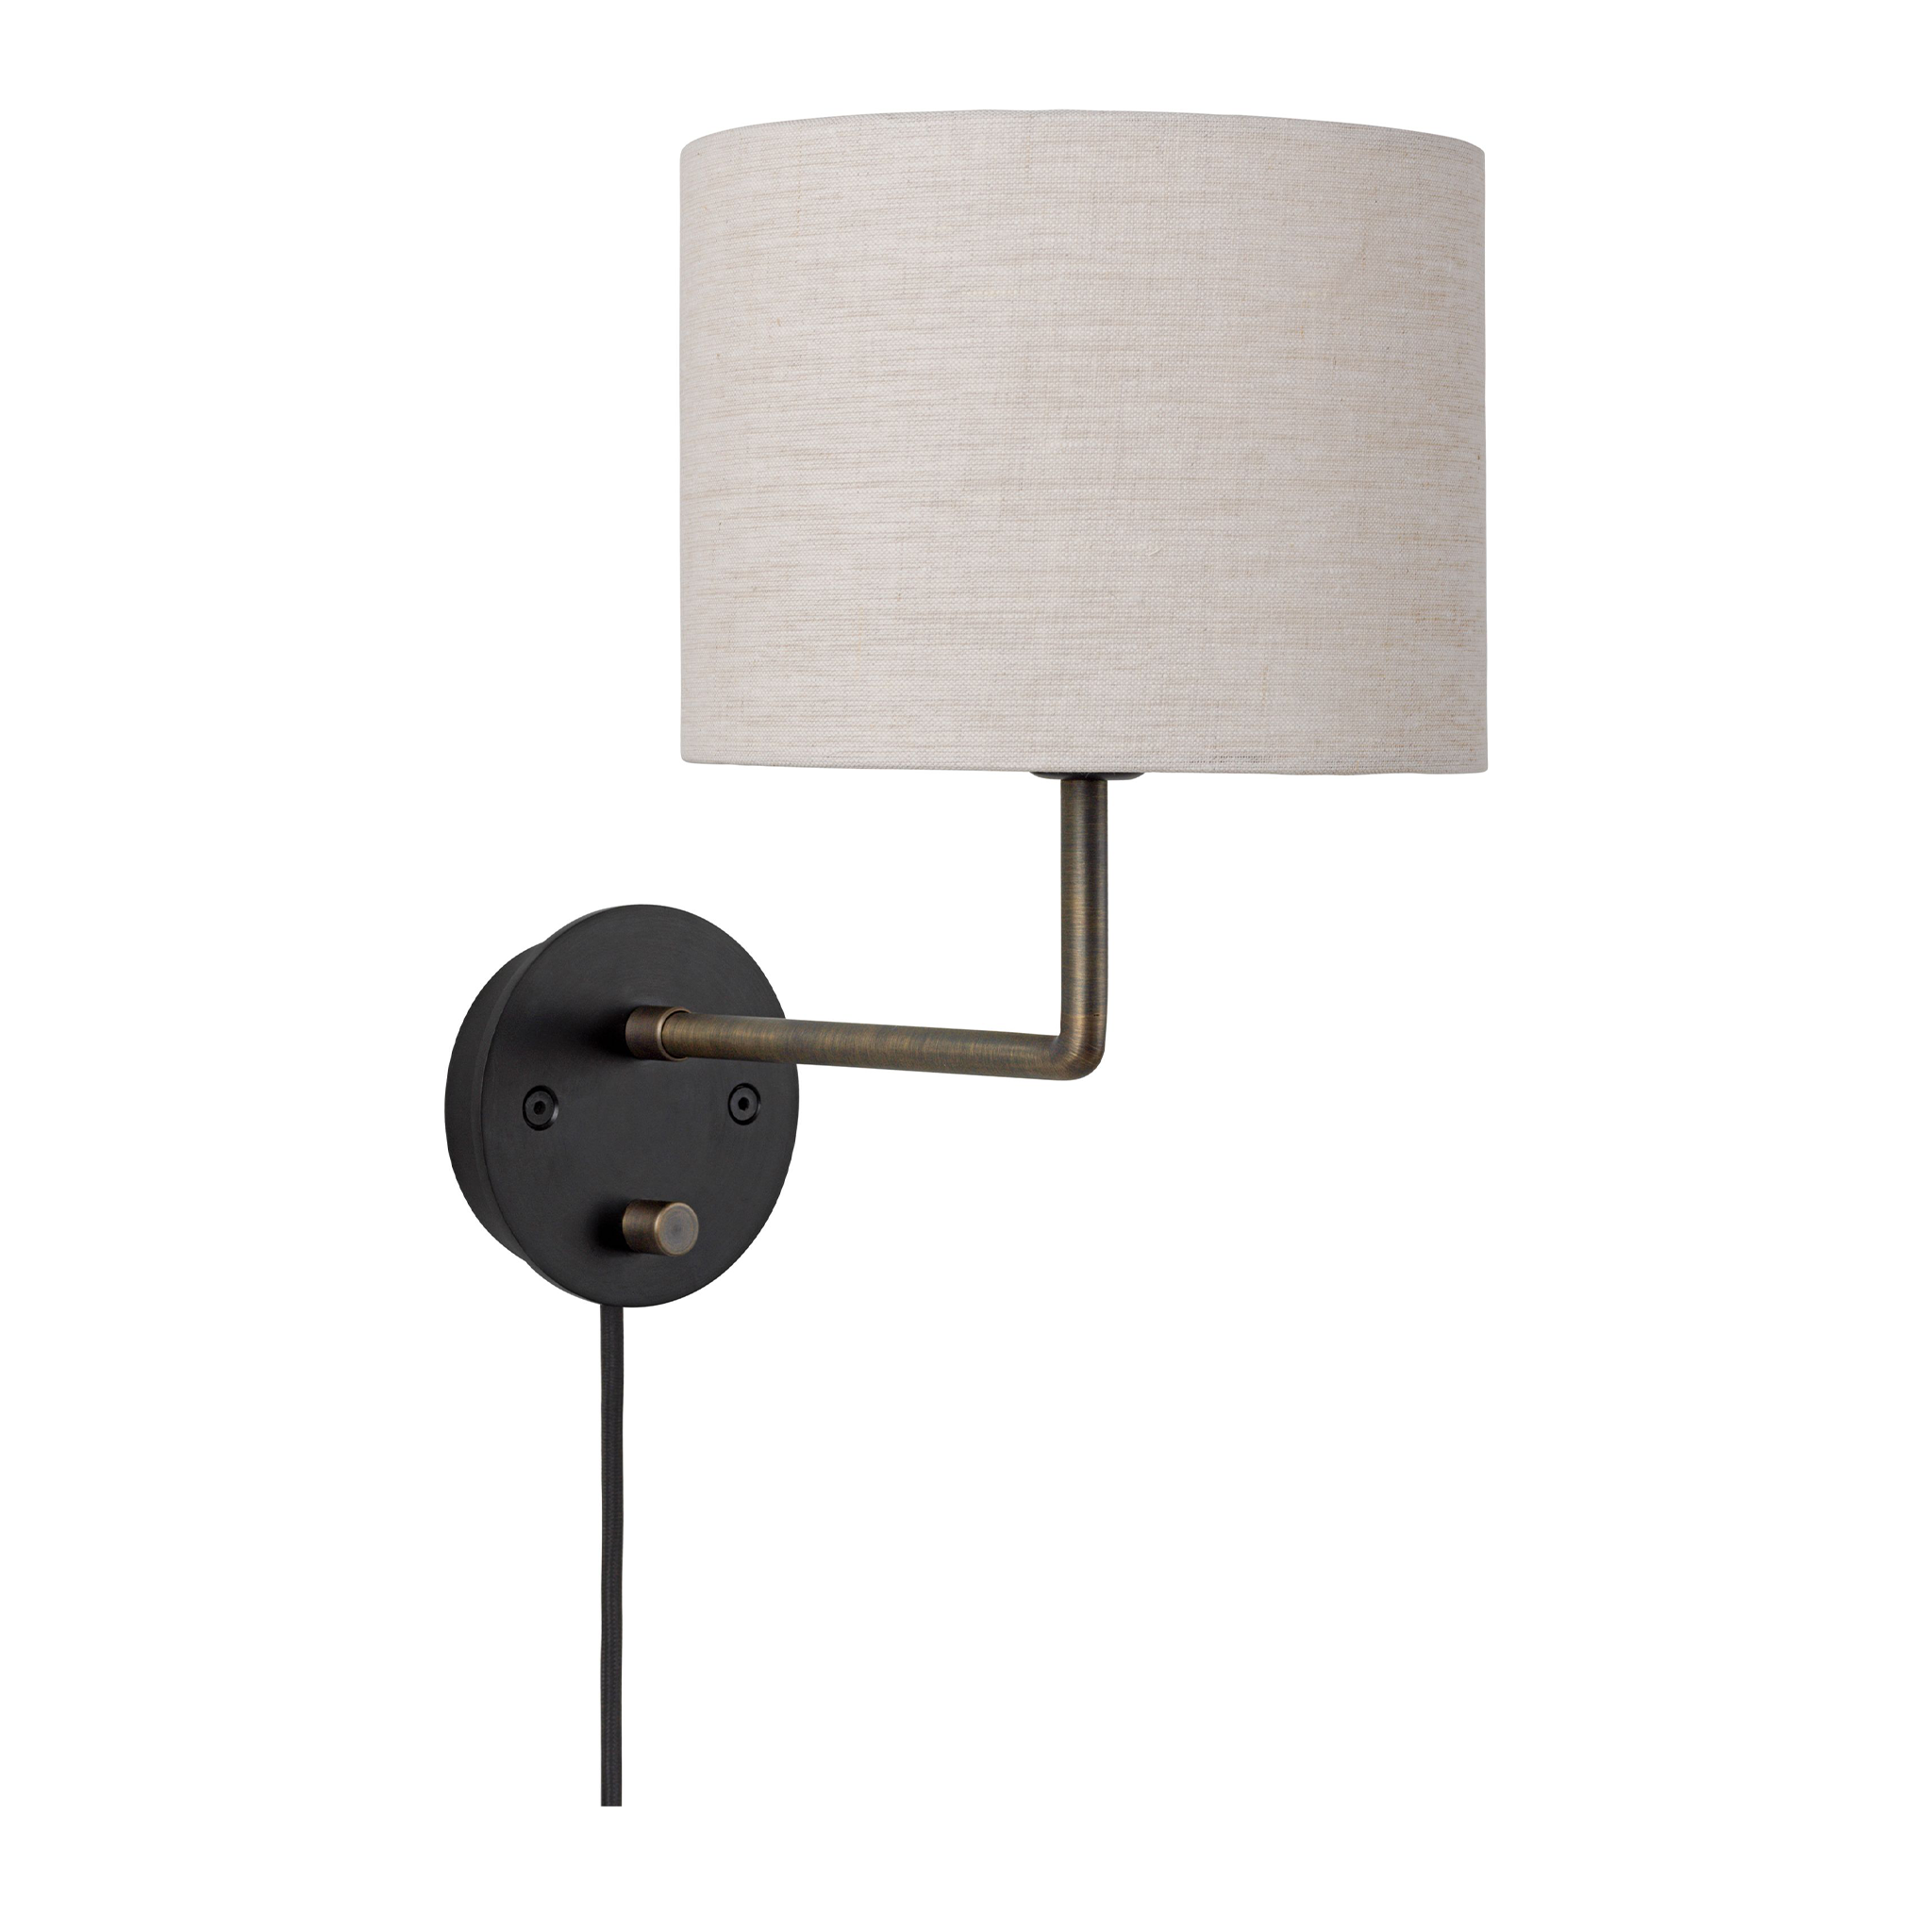 Gravity Bedside Wall Lamp (Small) by Gubi